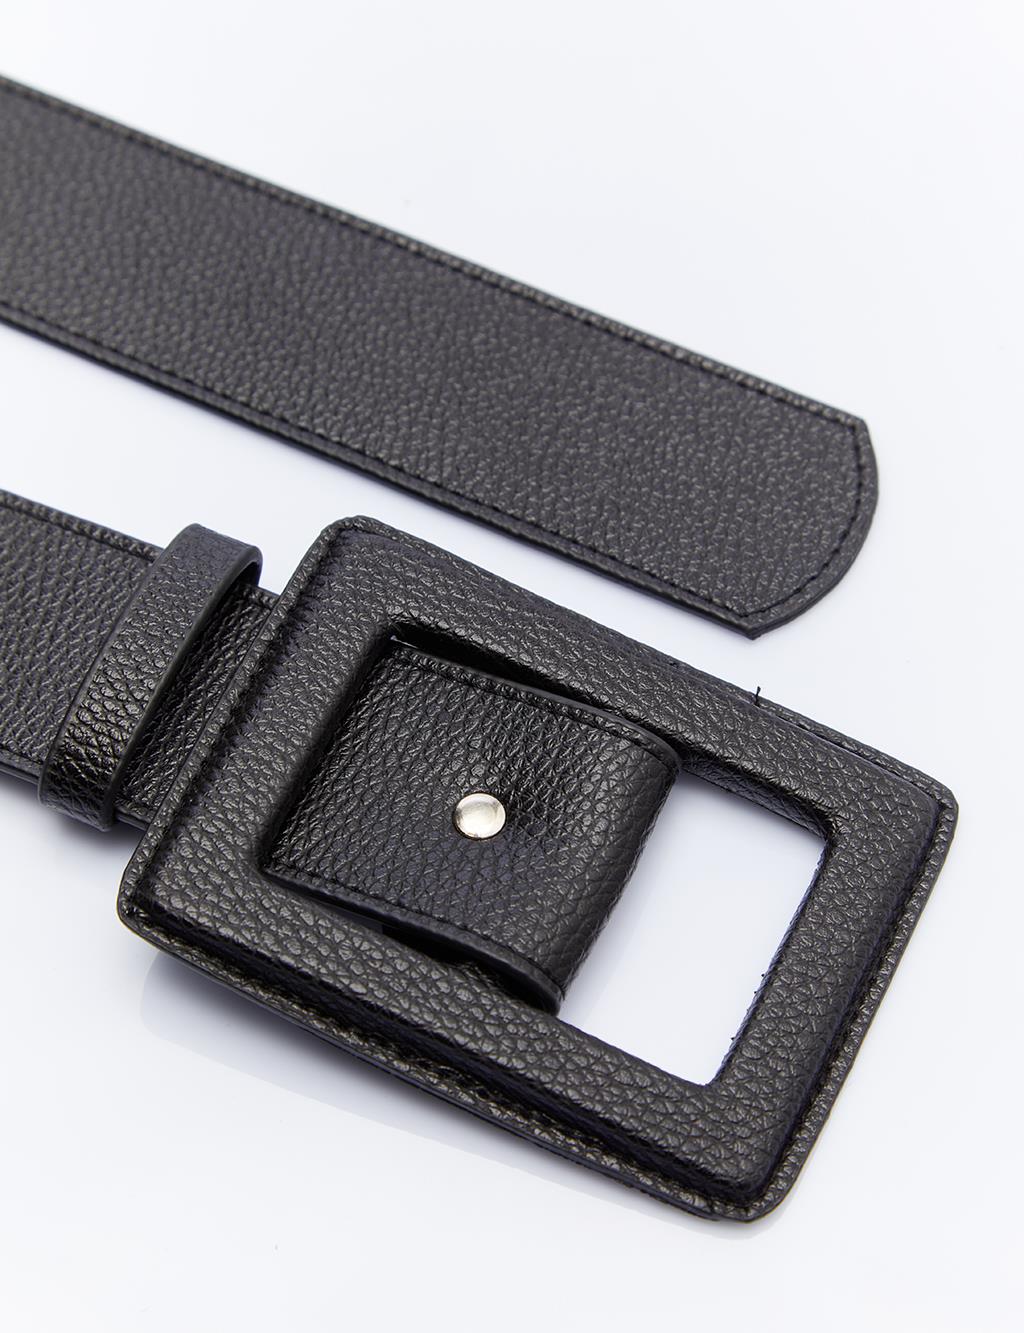 Belt with Plated Buckle Black